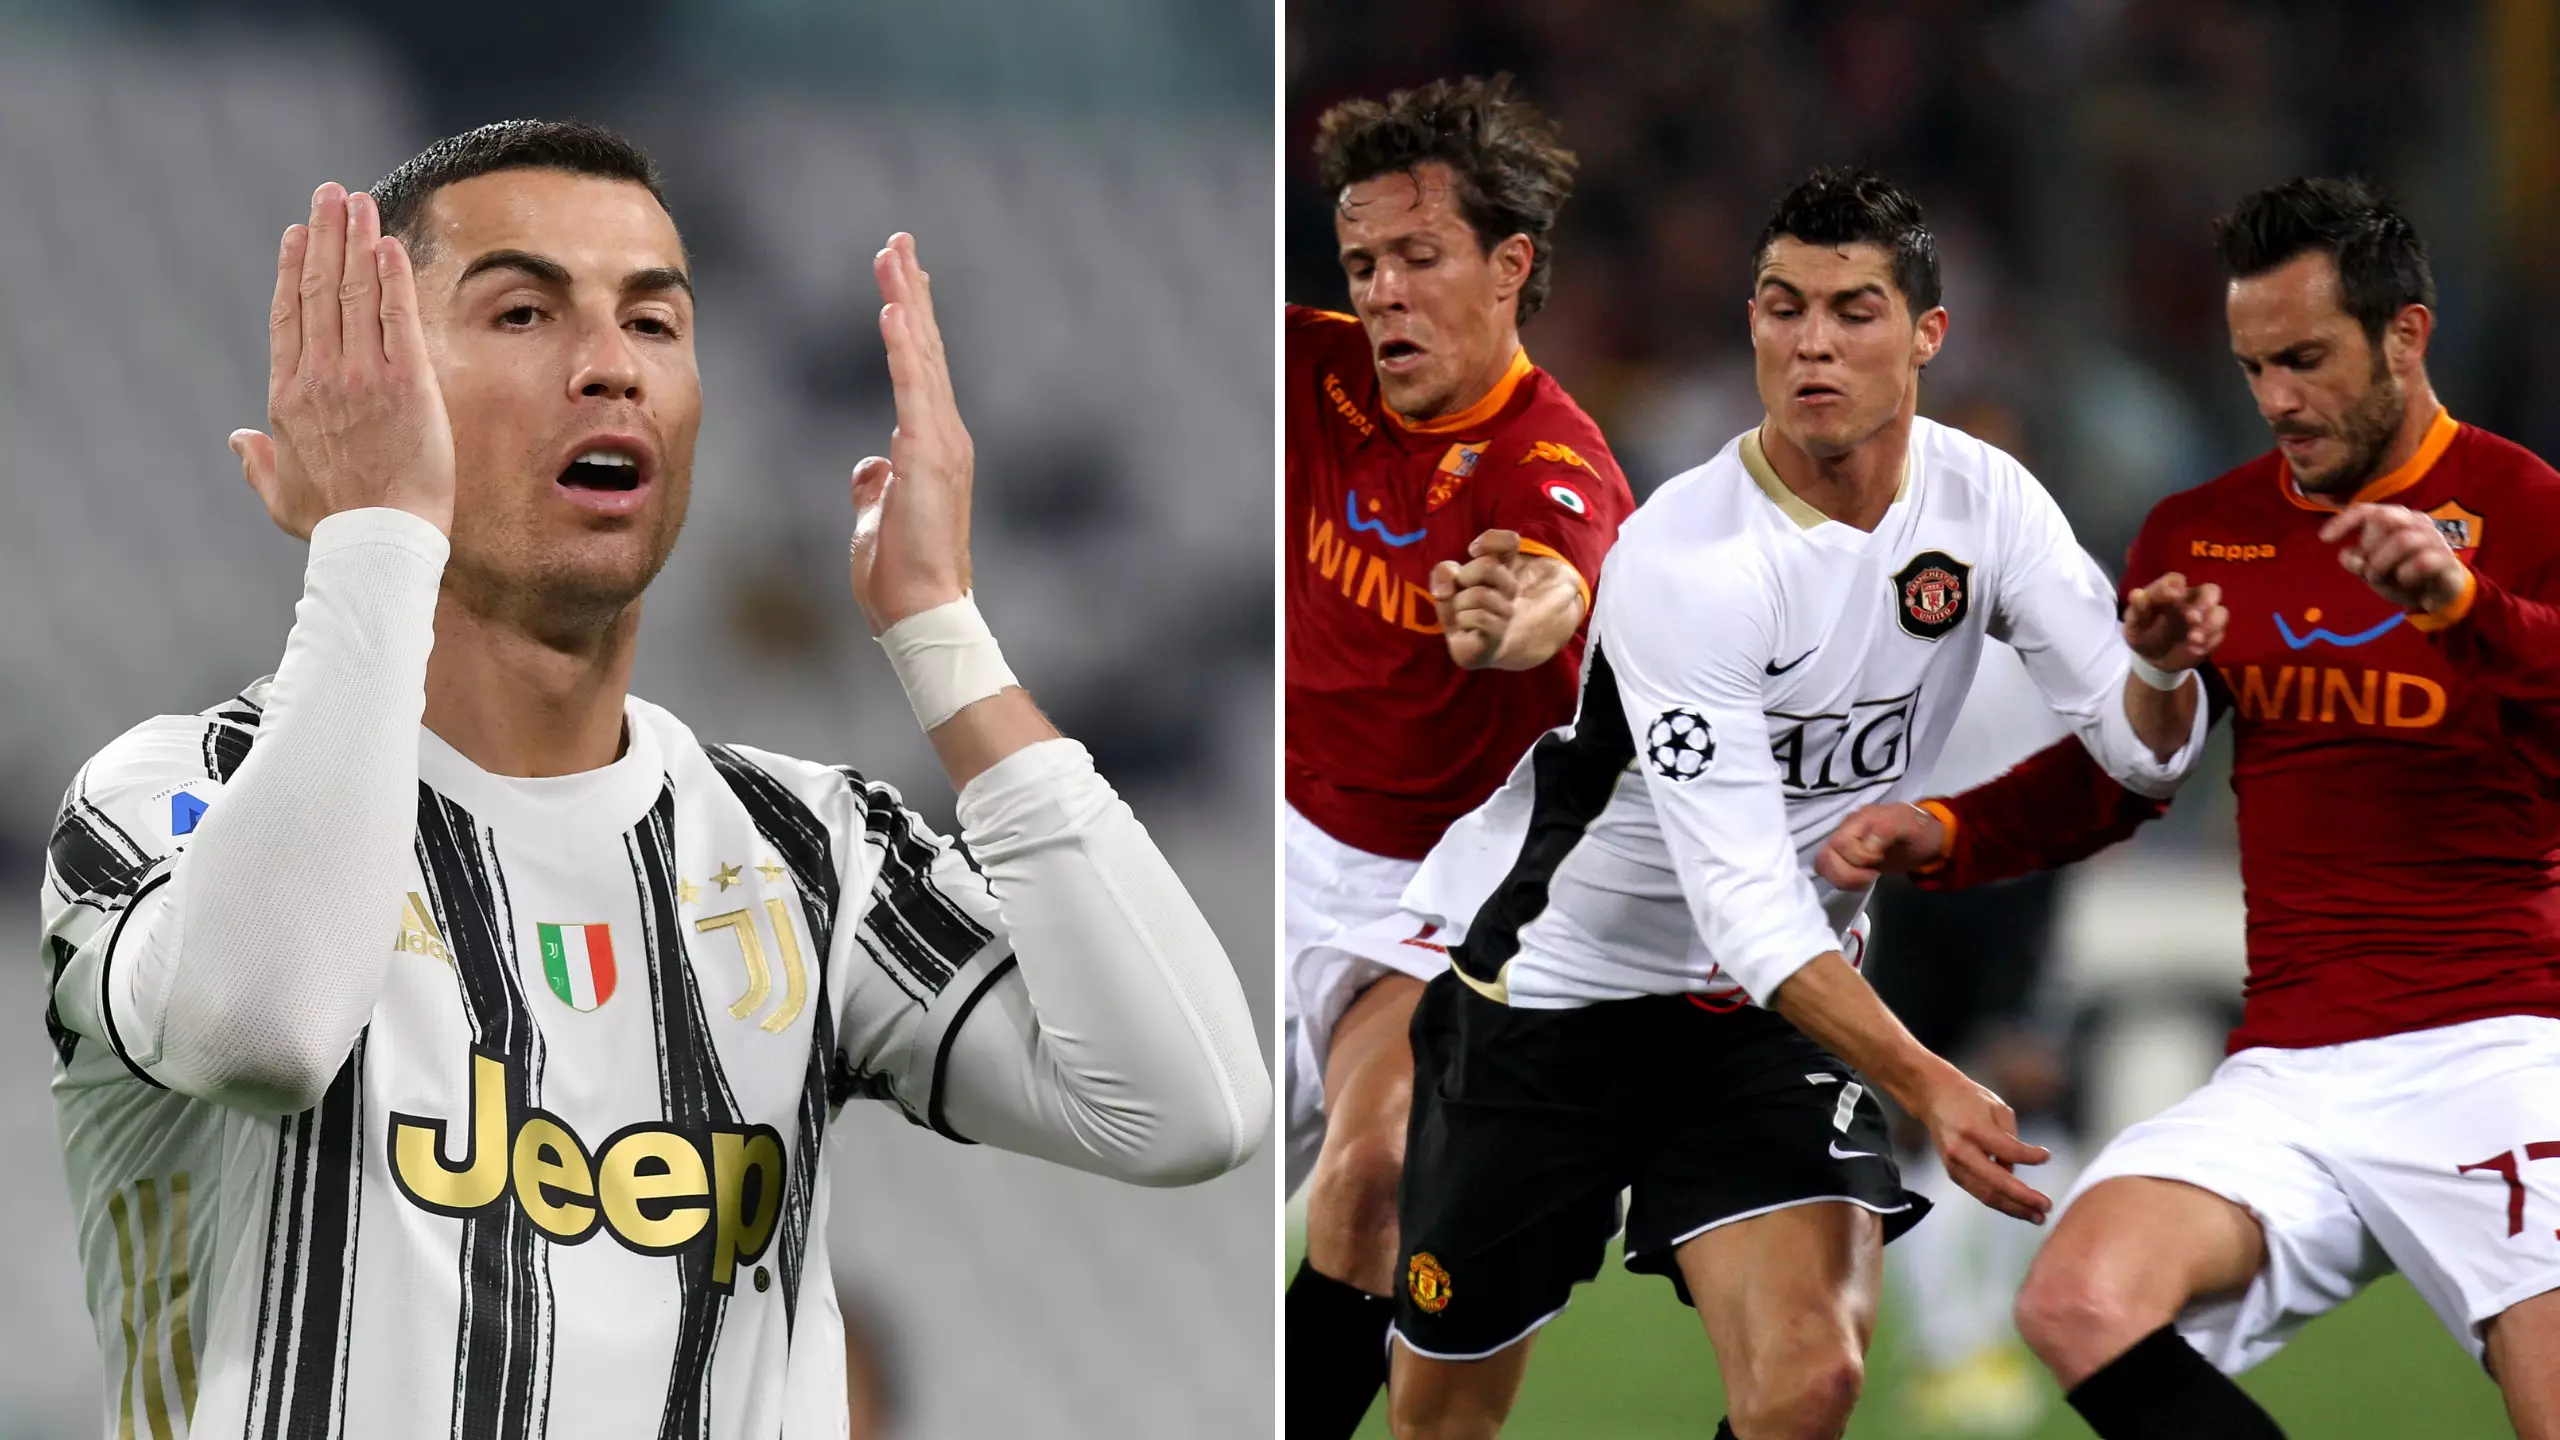 Why Cristiano Ronaldo Will Never Swap Shirts With A Roma Player